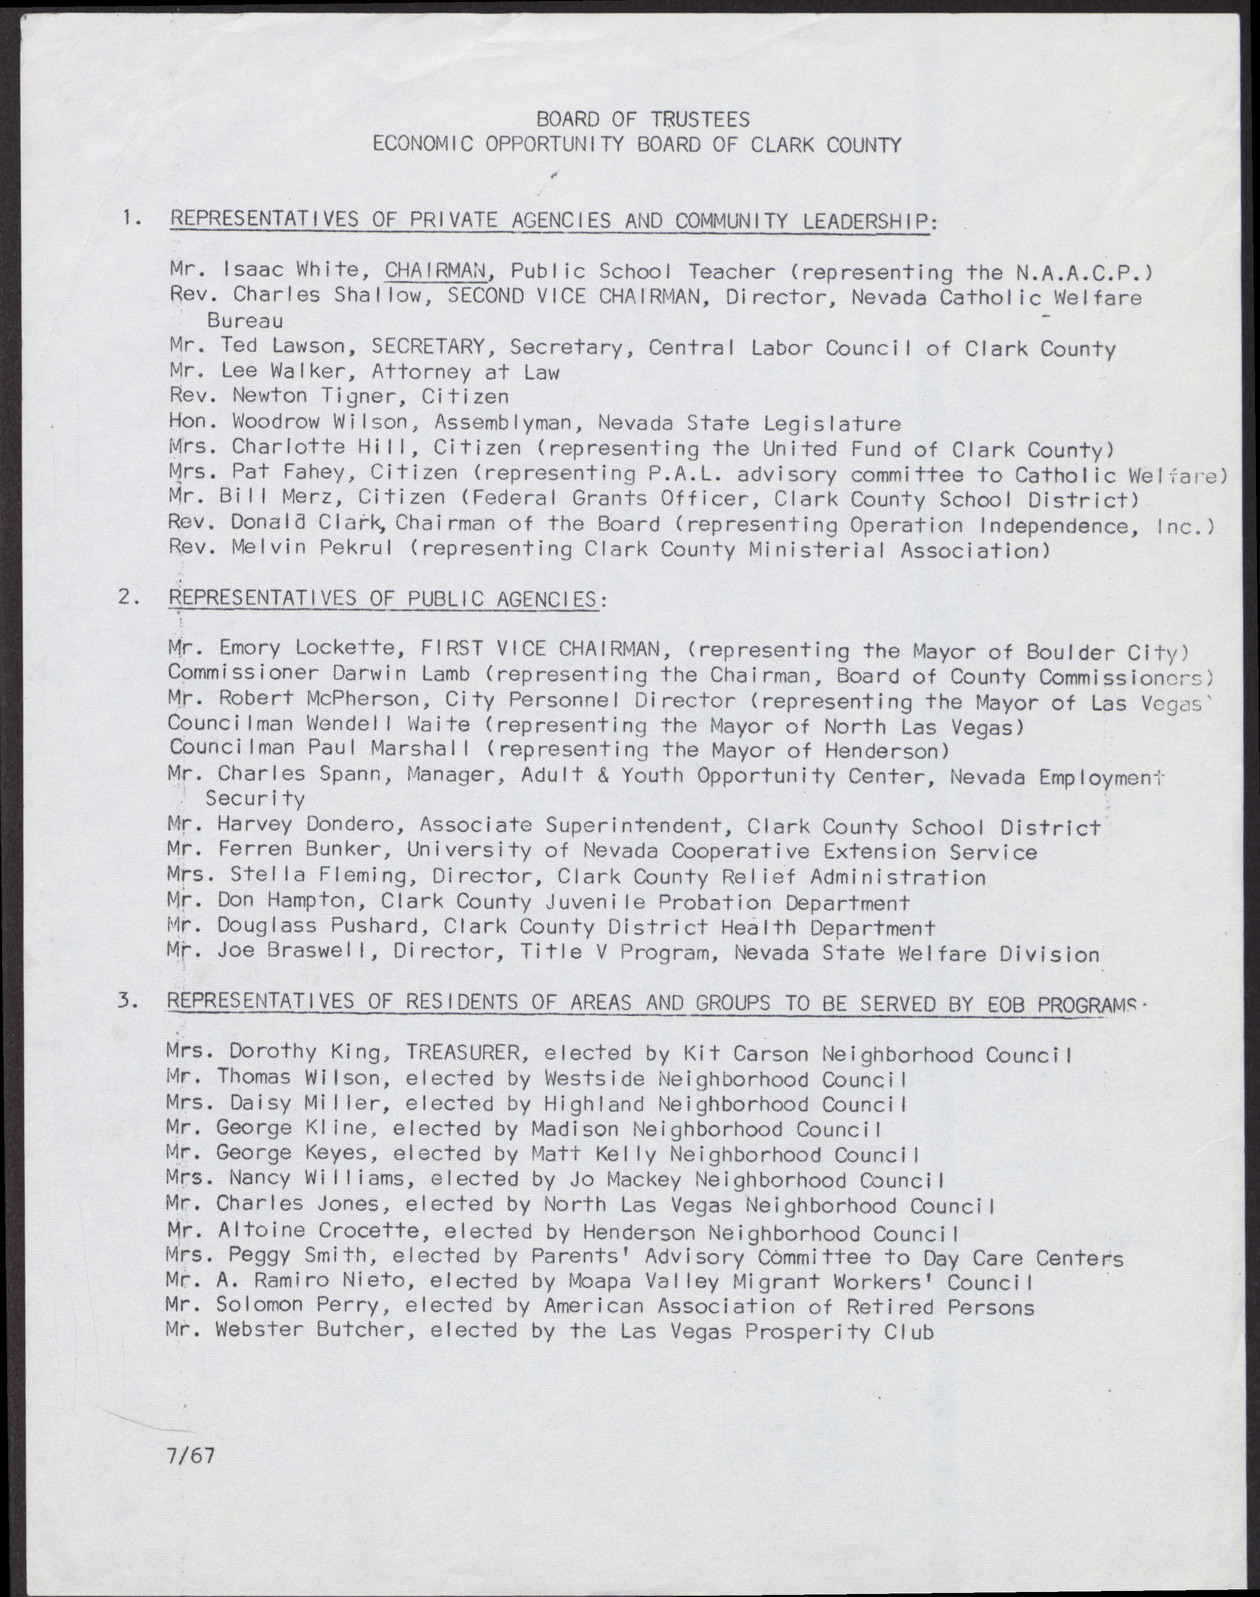 List of Economic Opportunity Board of Clark County Officers (2 pages), 1967-1968, page 2